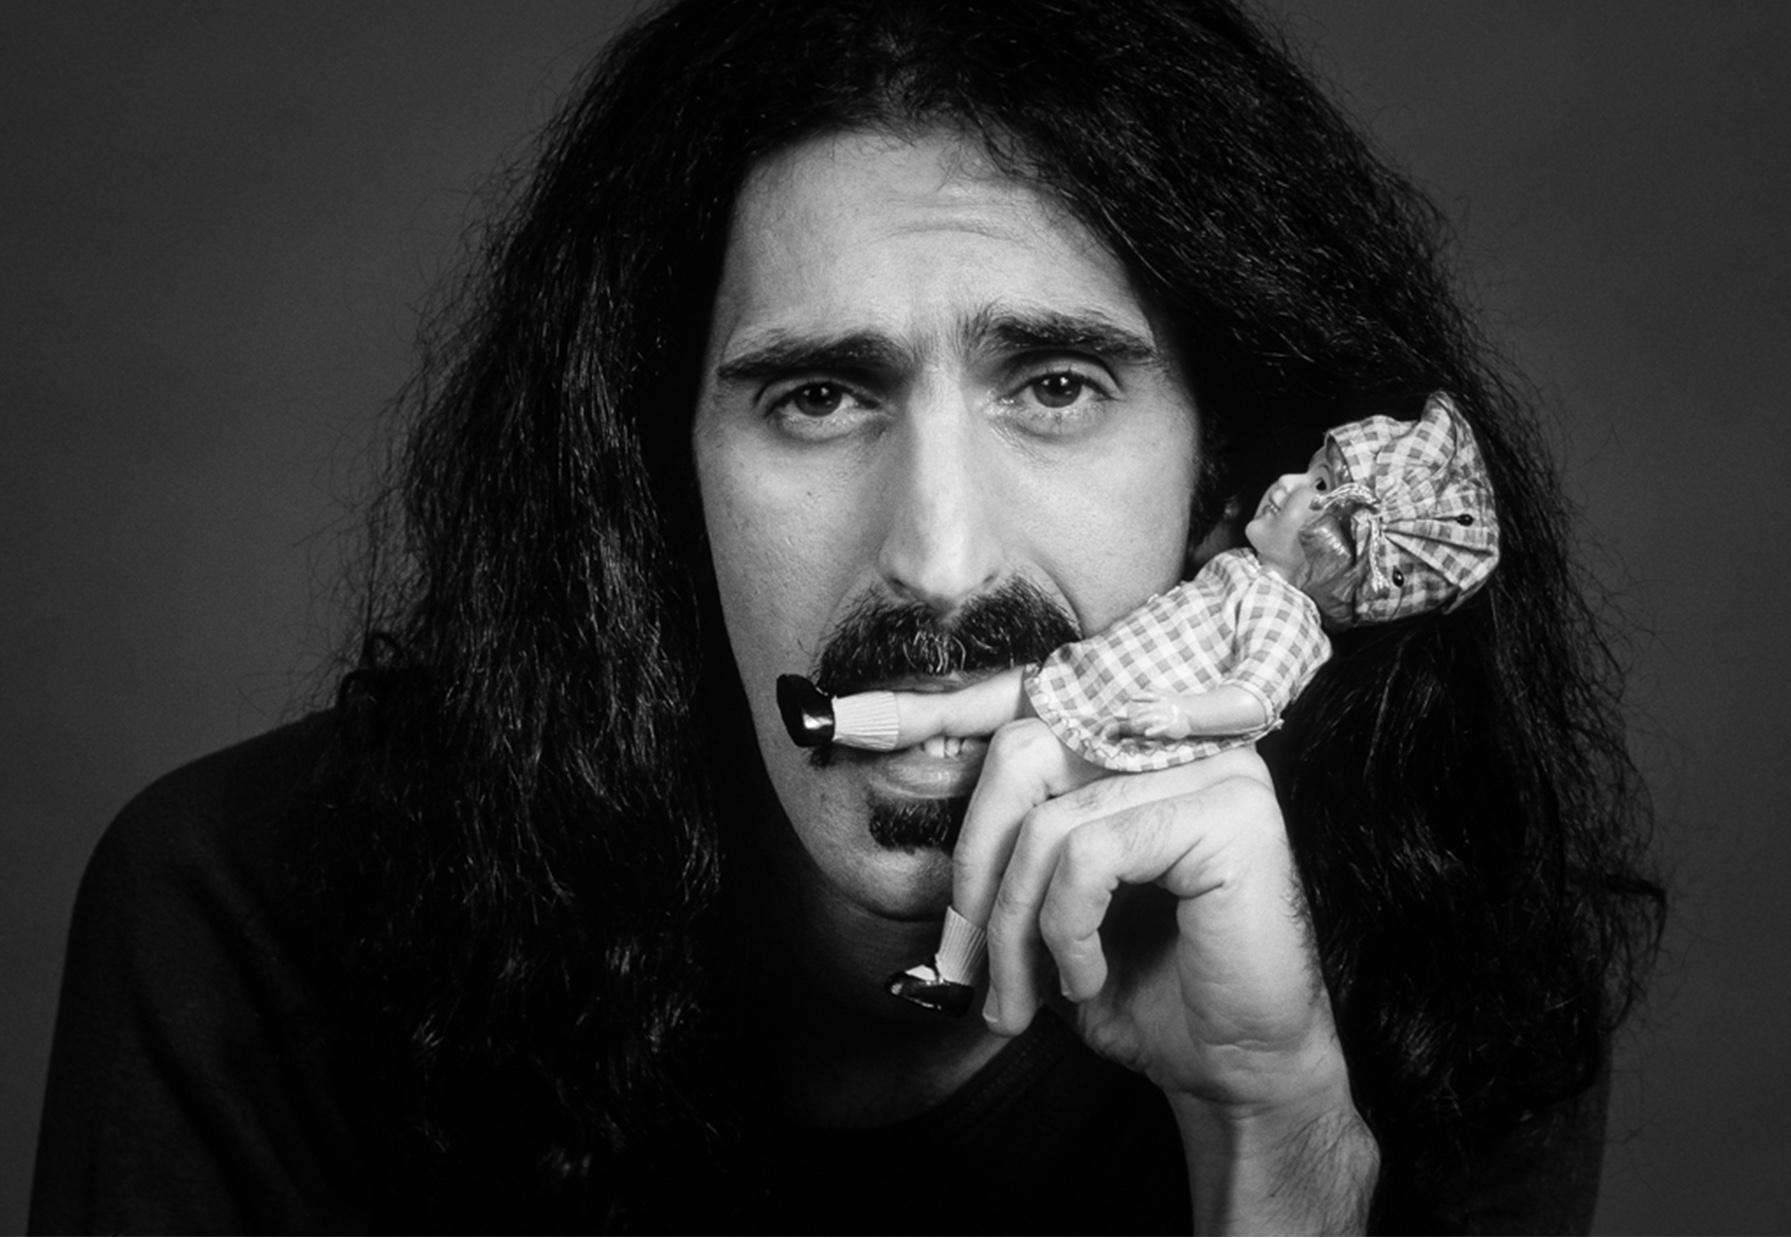 Signed limited edition print of Frank Zappa taken in 1978 by Lynn Goldsmith



Signed limited edition #2/20 - signed, numbered and titled by Lynn Goldsmith